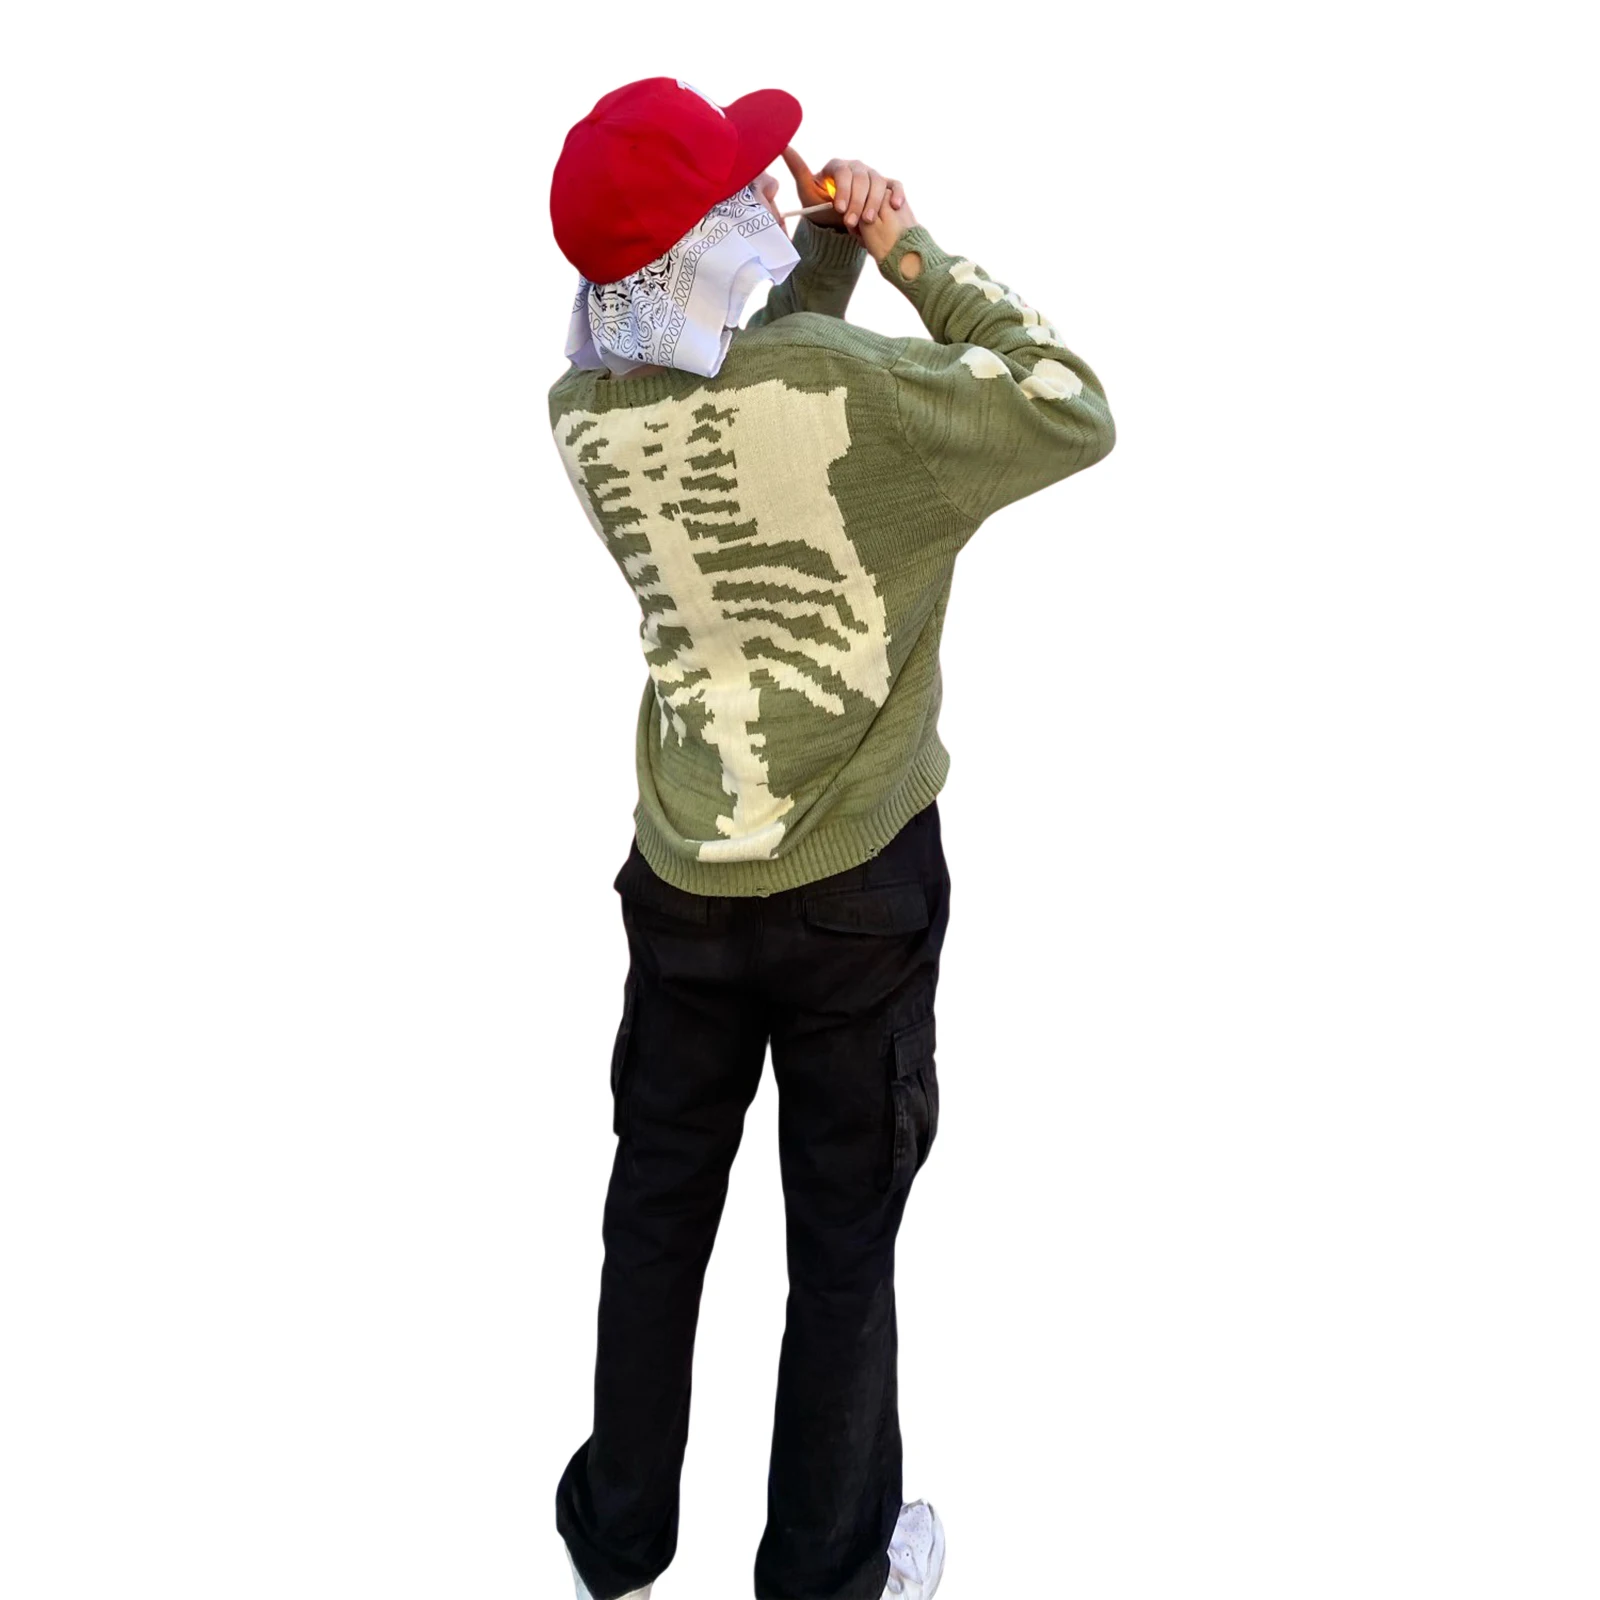 christmas sweaters Women Men Autumn Polyester Crew Neck Sweaters Casual Long Sleeve Skeleton Print Loose Knit Pullovers Tops red cardigan